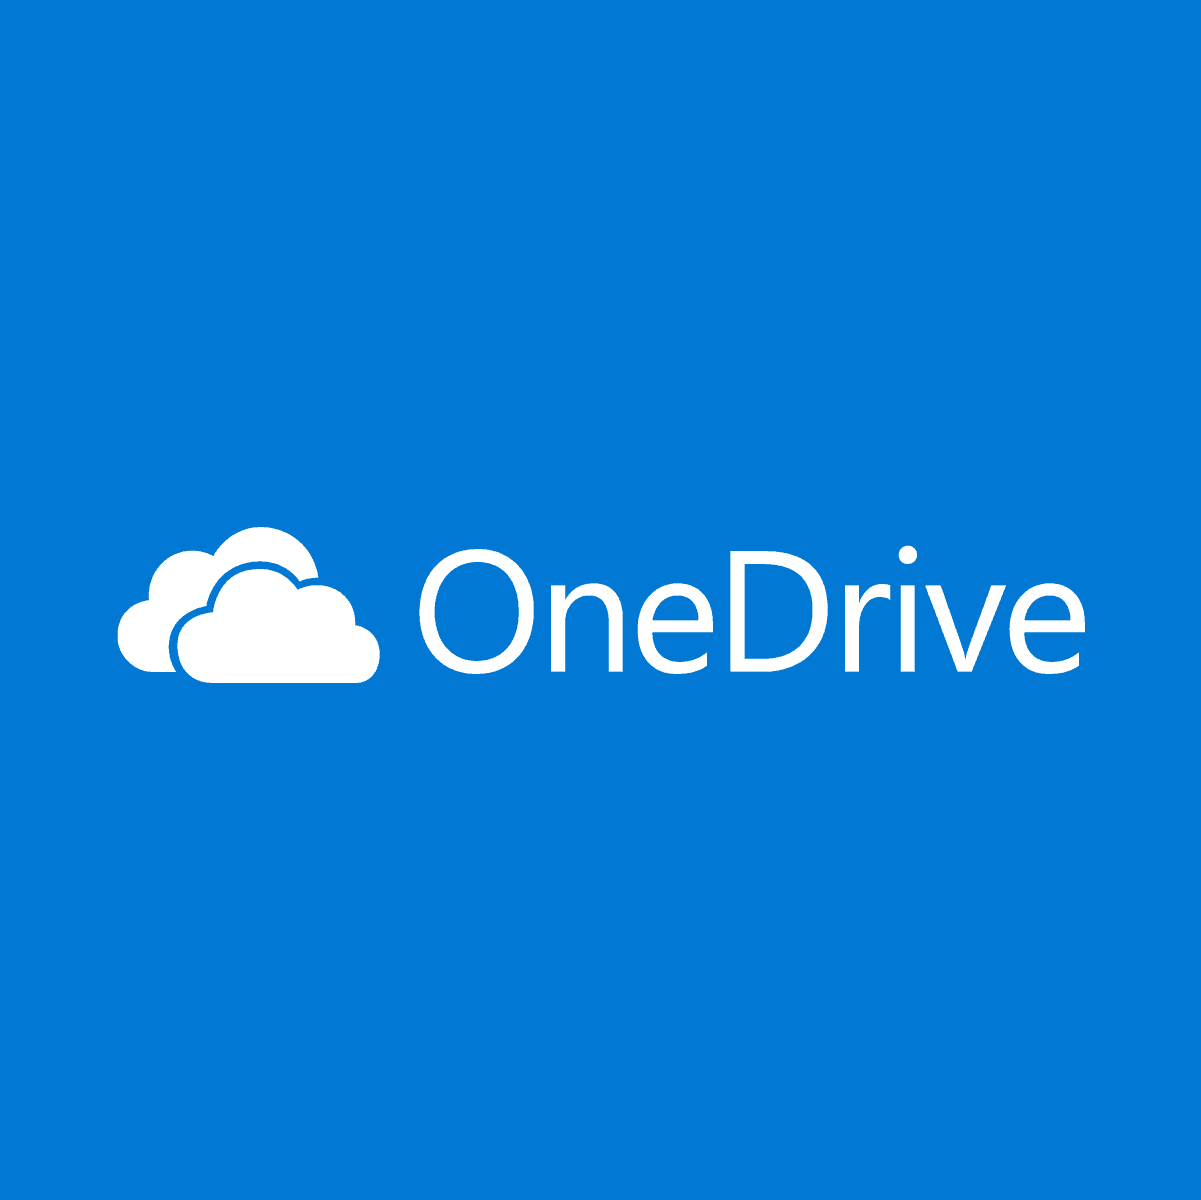 use a download manager to download microsoft onedrive files